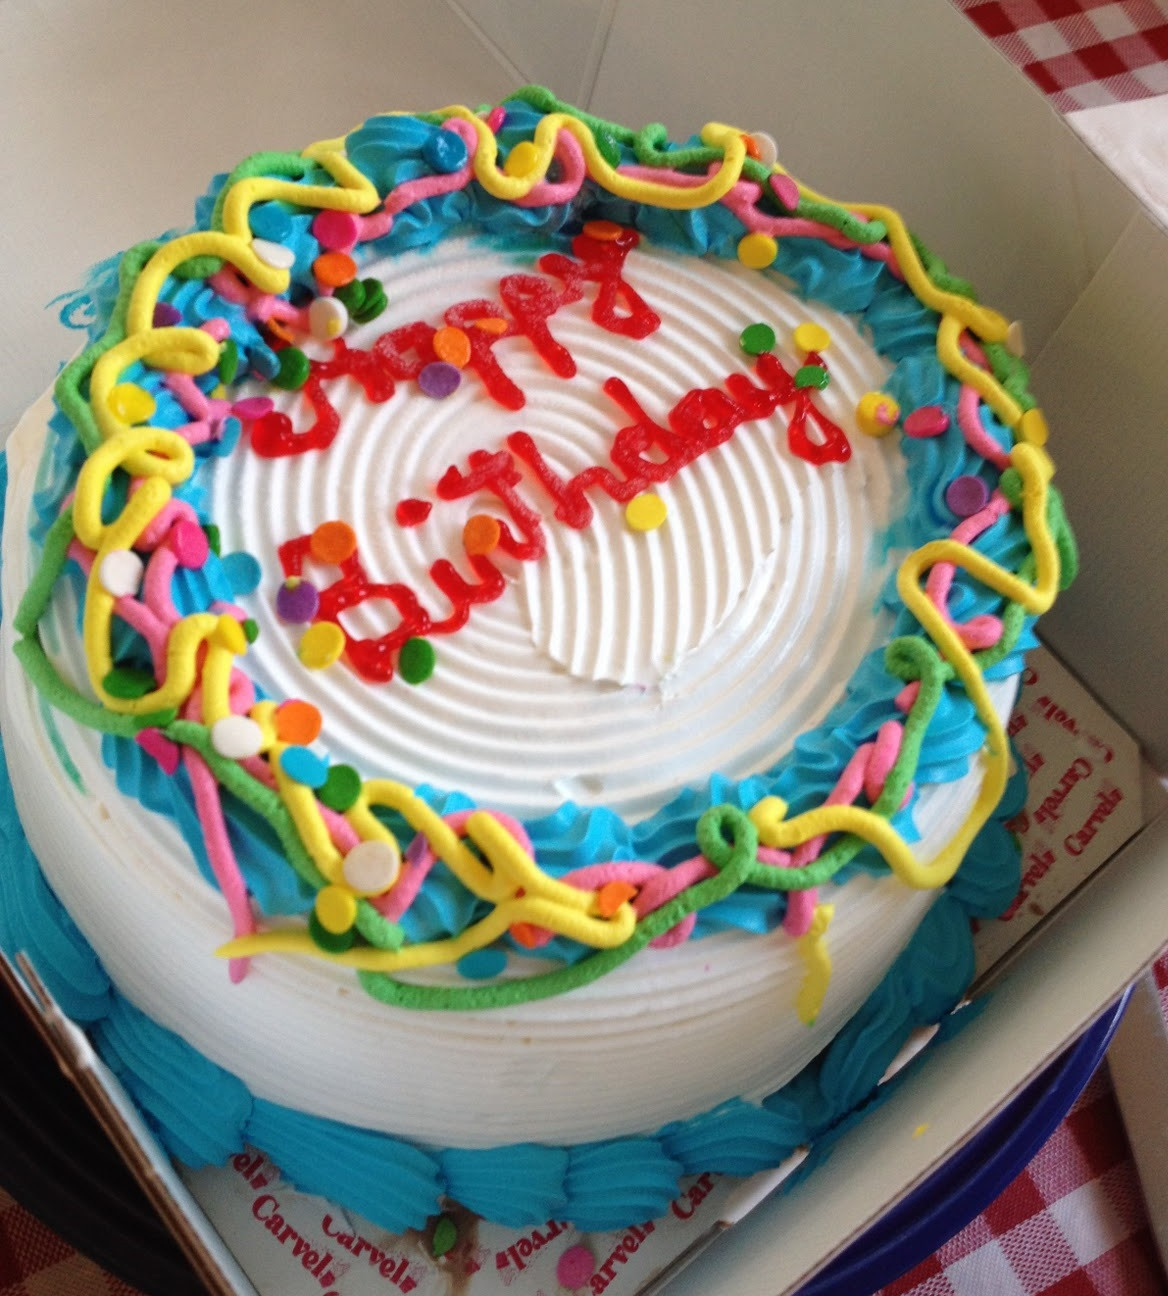 Carvel Birthday Cakes
 ihot wallons It s My Birthday Today Let s Celebrate with